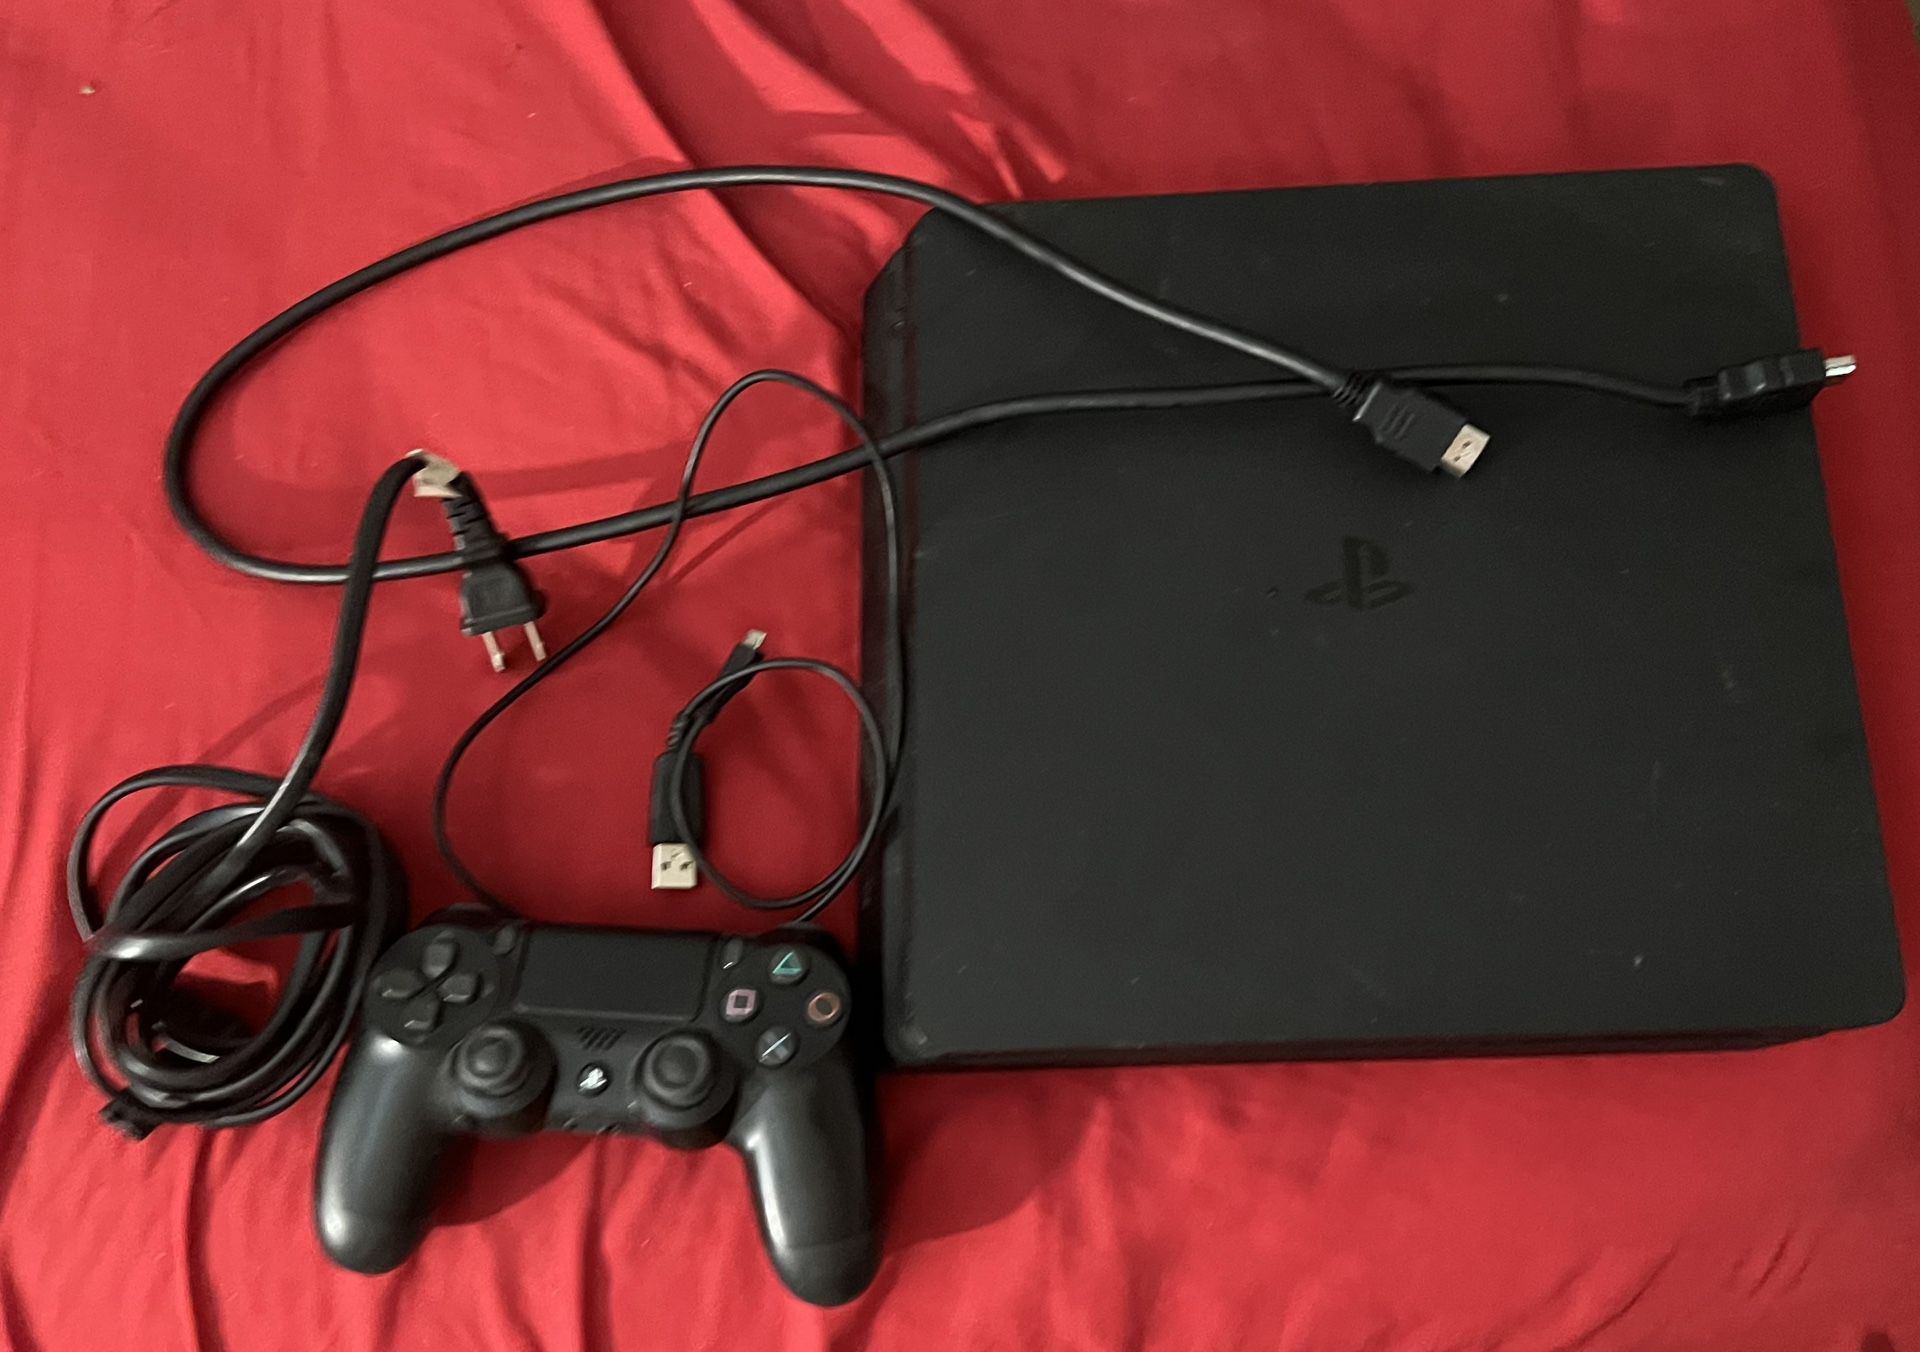 ps4 with one wireless controller and two games